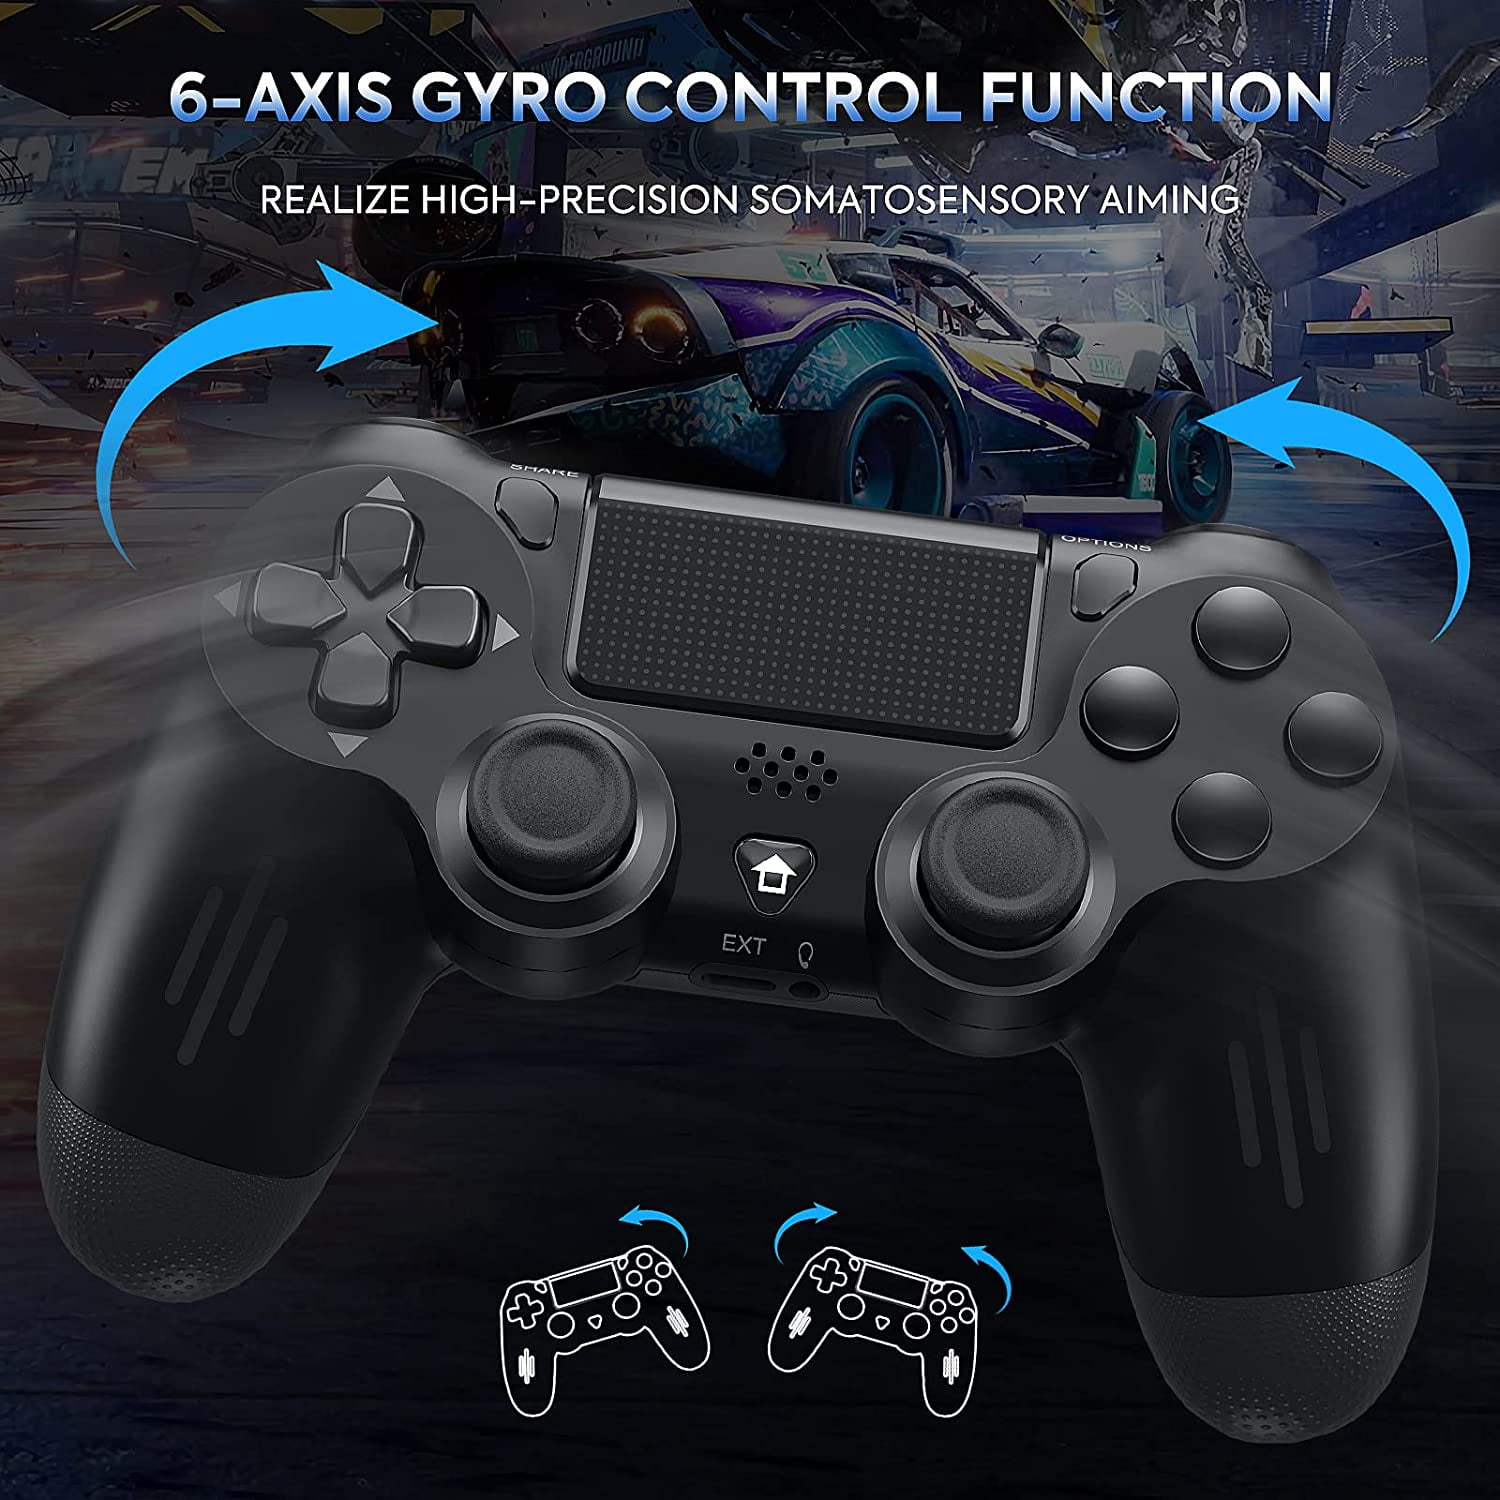 Hall Sensor Trigger Dual Vibration Game Controller Remote Gamepad Joystick for Playstation 4 Console ASUSPORACE Wireless Controller for PS4 Slim/Pro/PC 